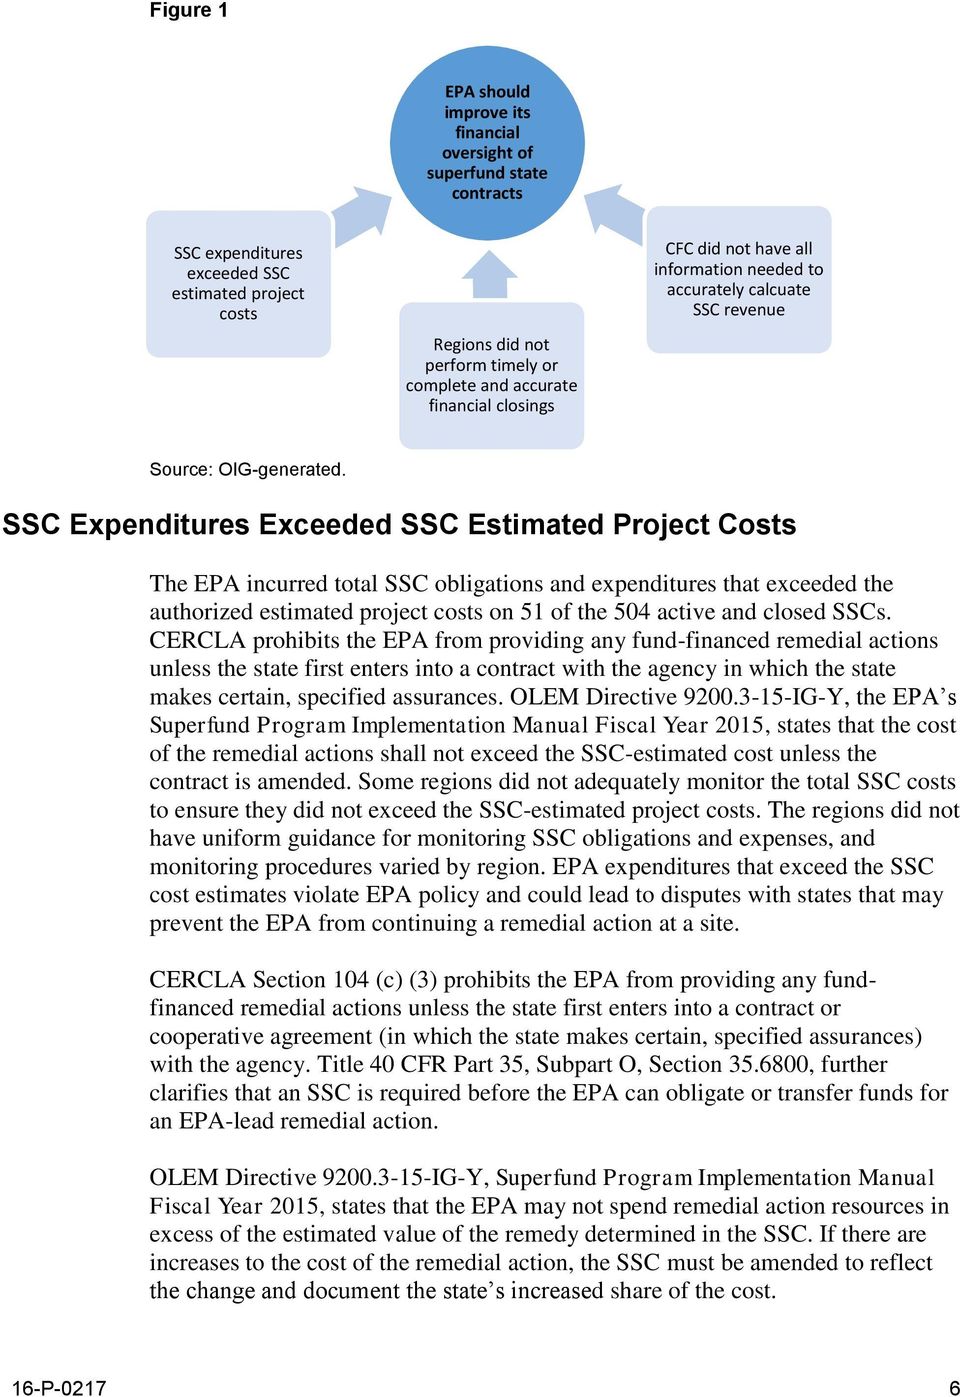 SSC Expenditures Exceeded SSC Estimated Project Costs The EPA incurred total SSC obligations and expenditures that exceeded the authorized estimated project costs on 51 of the 504 active and closed